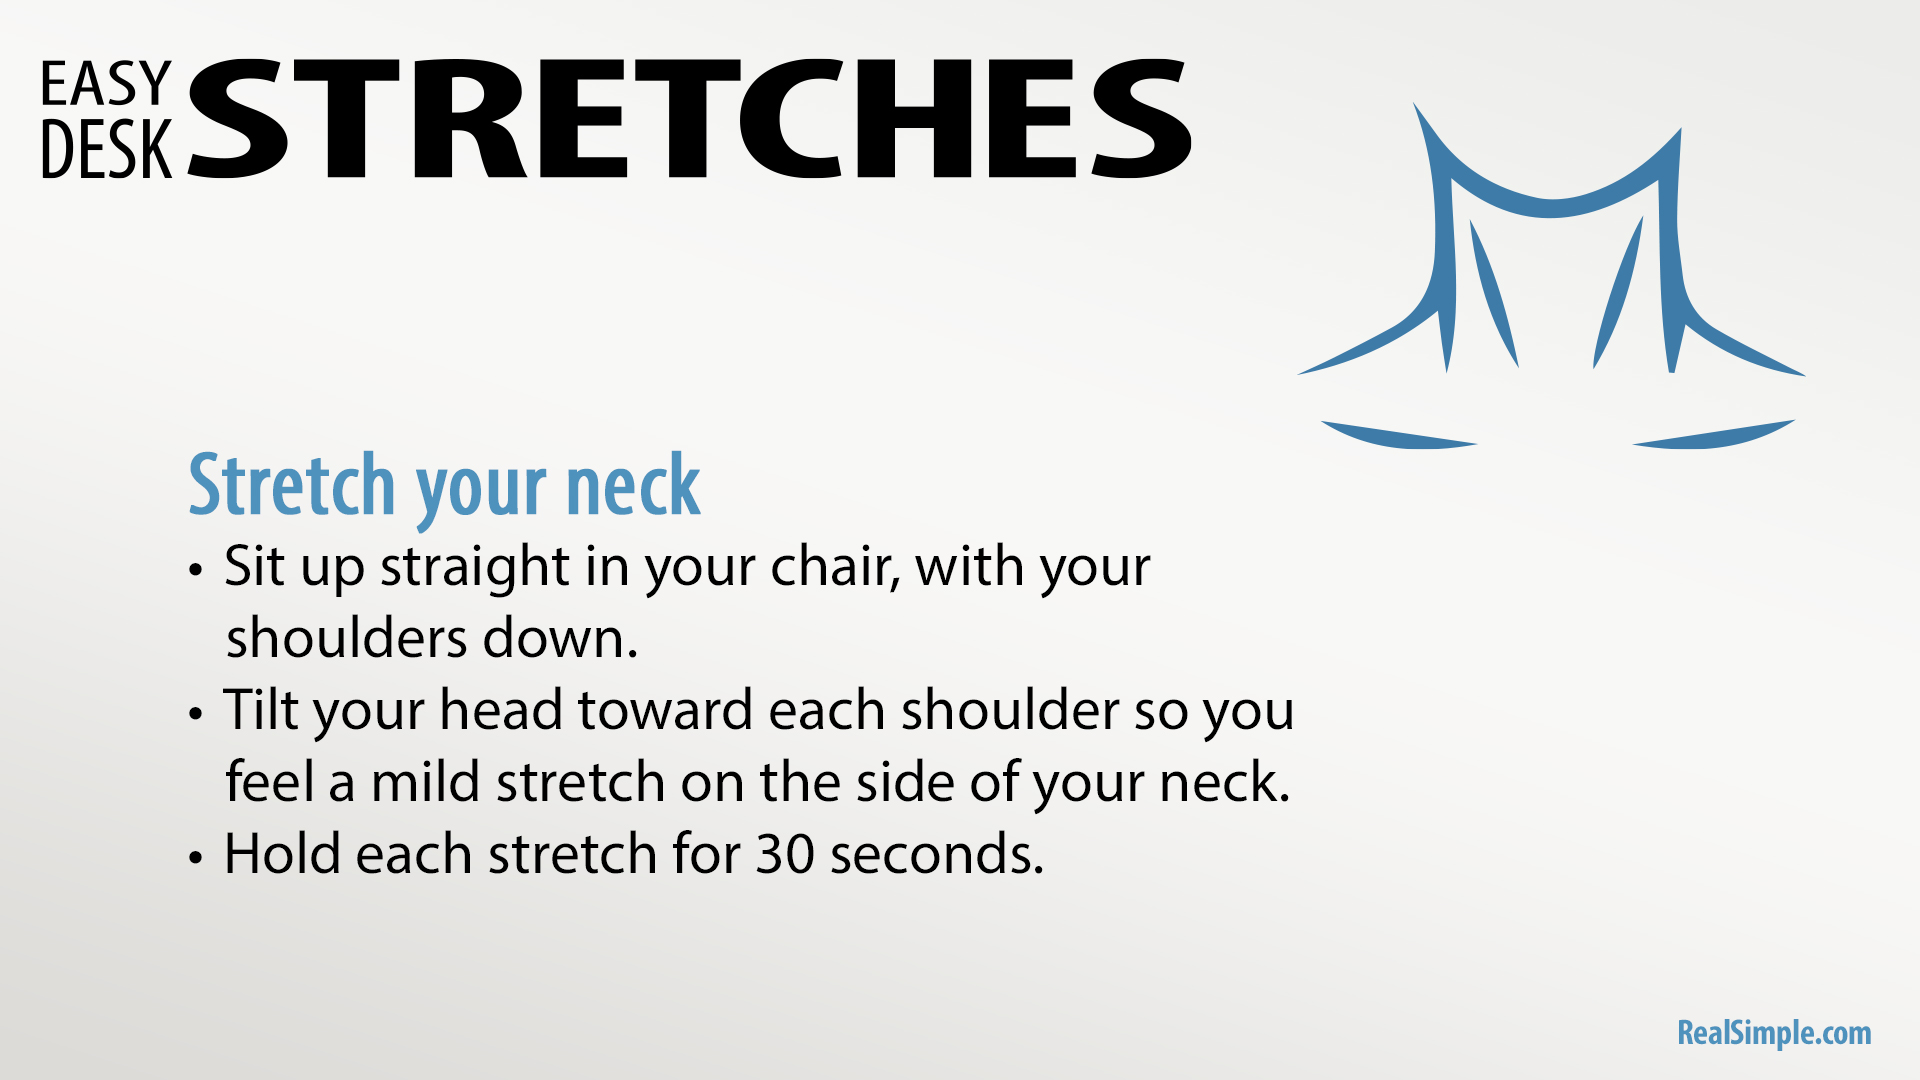 Free Graphic | Easy Desk Stretches | Stretch Your Neck